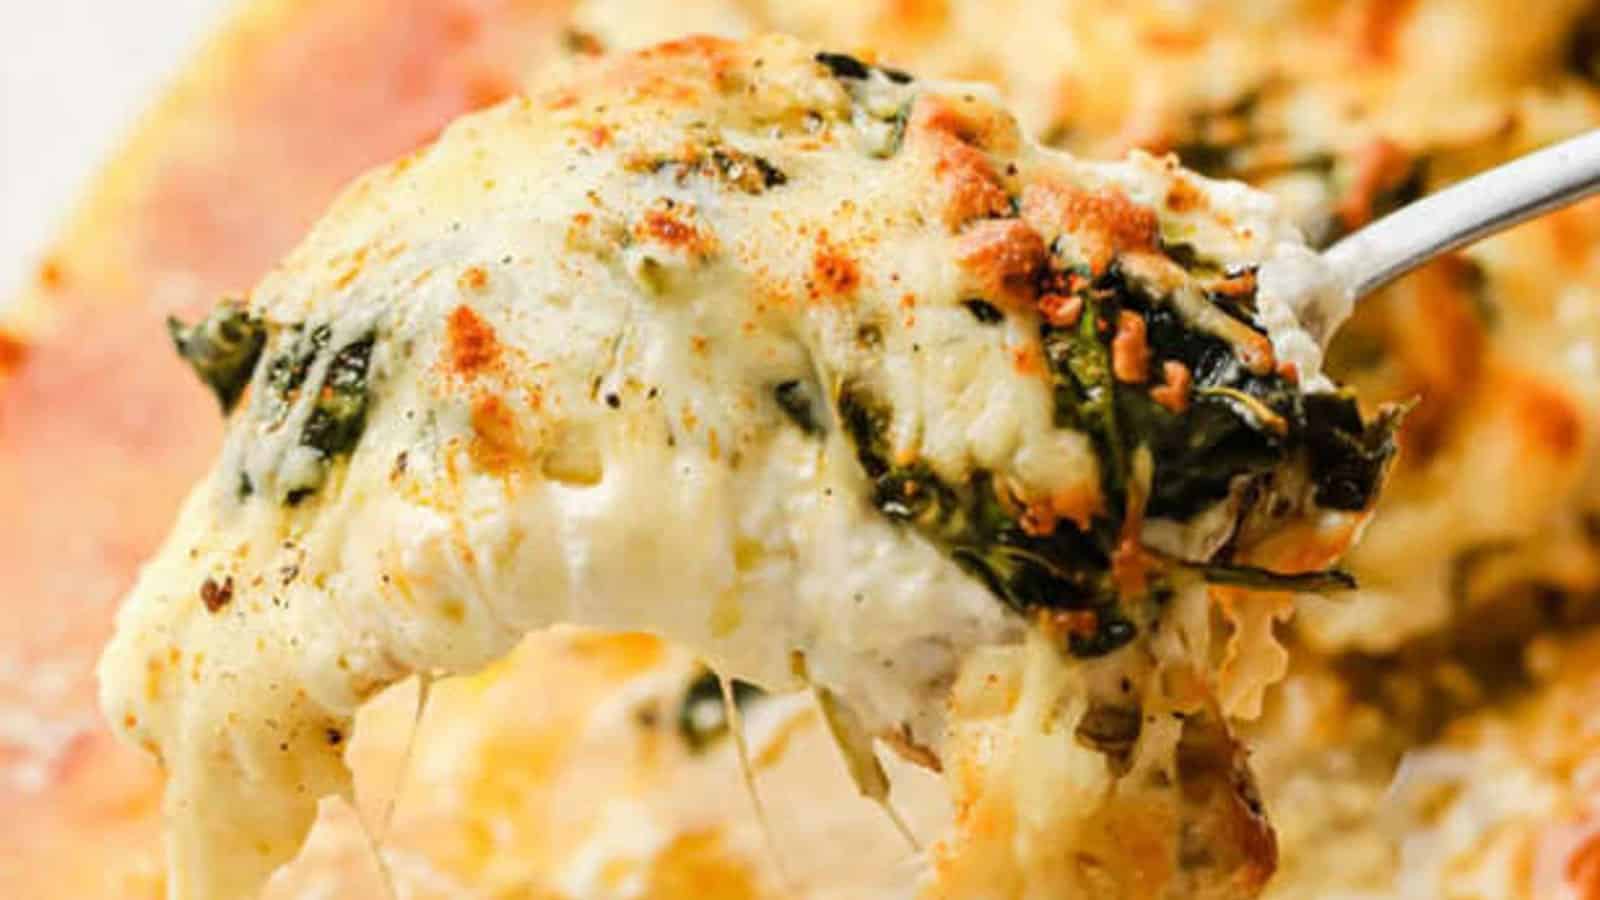 A serving spoon serving of creamy spinach chicken bake.